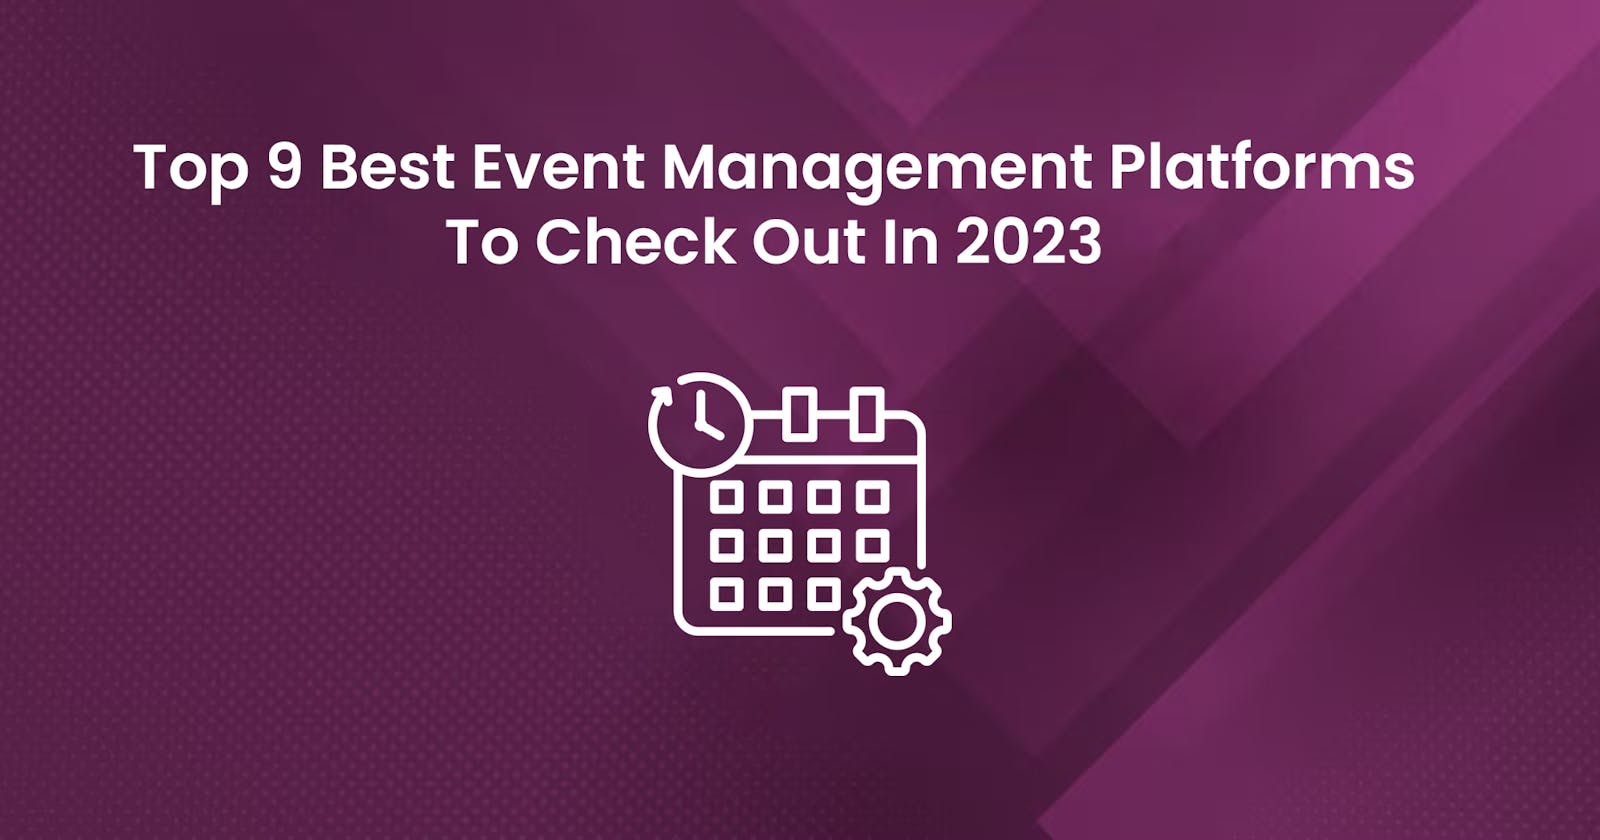 Top 9 Best Event Management Platforms To Check Out In 2023